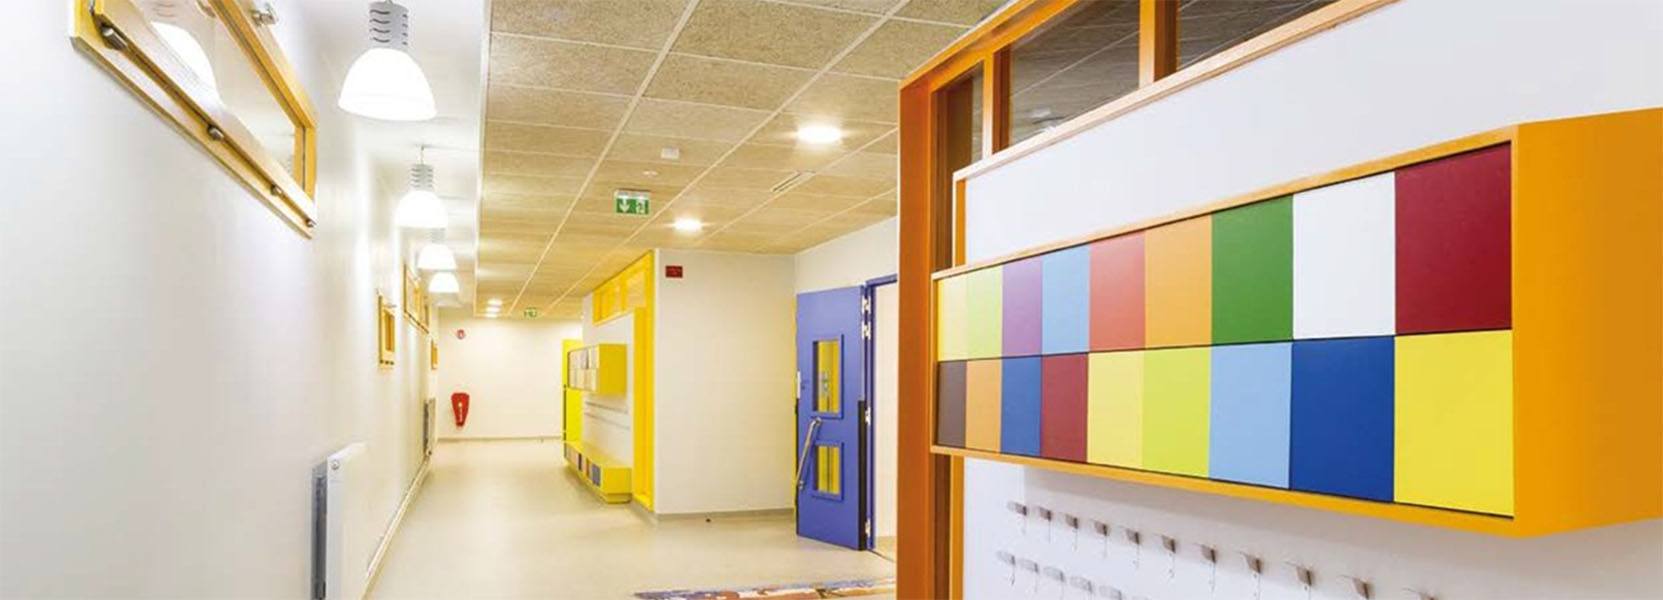 Organic Panels Installed Into a Modular Ceiling in a School Corridor